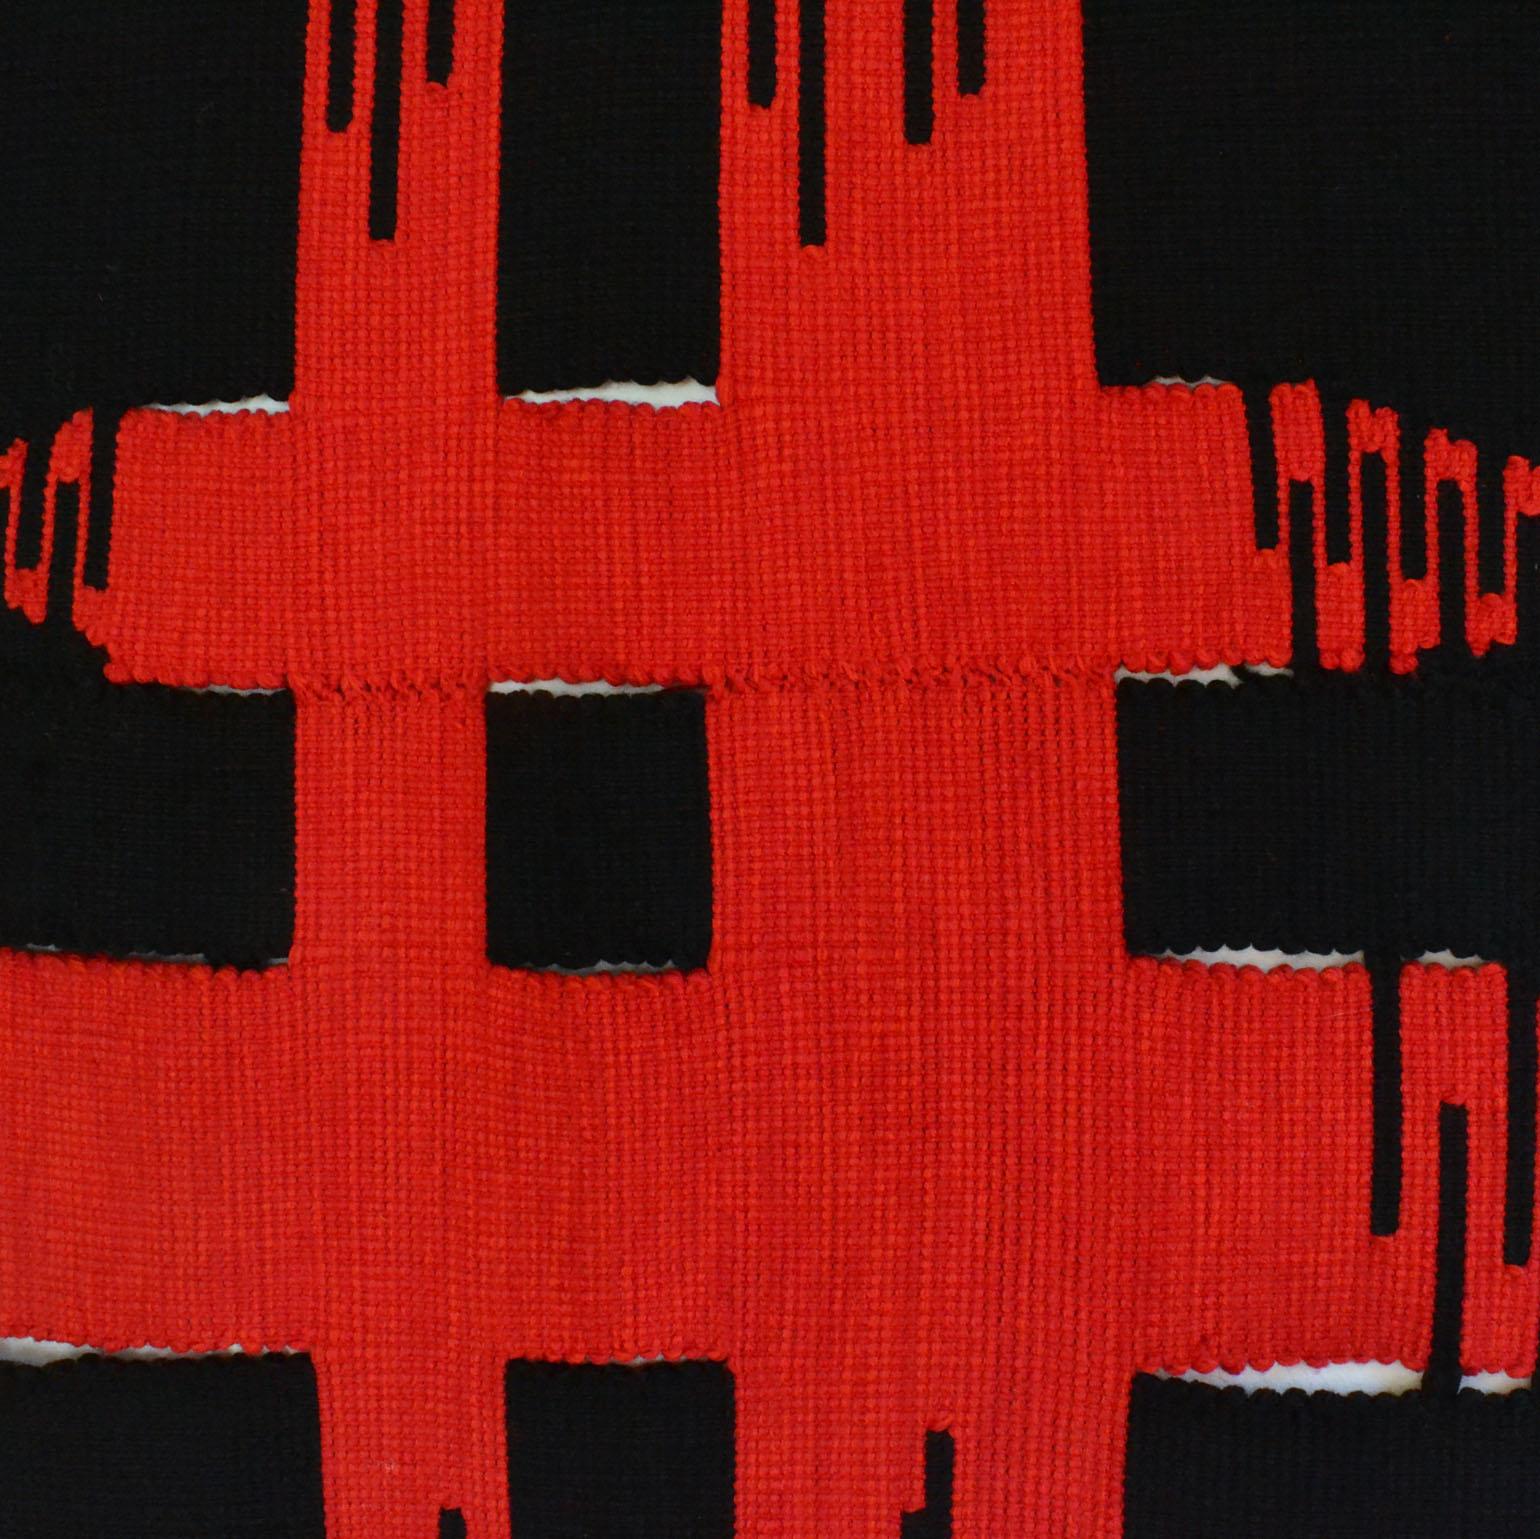 Modern abstract art hand woven tapestry by Dutch artist Liesbeth Wiersma in red and black 1969 has been traditionally woven in wool by hand on a loom in a technique called Kelim. The artist explores the boundaries of abstract expressionism through